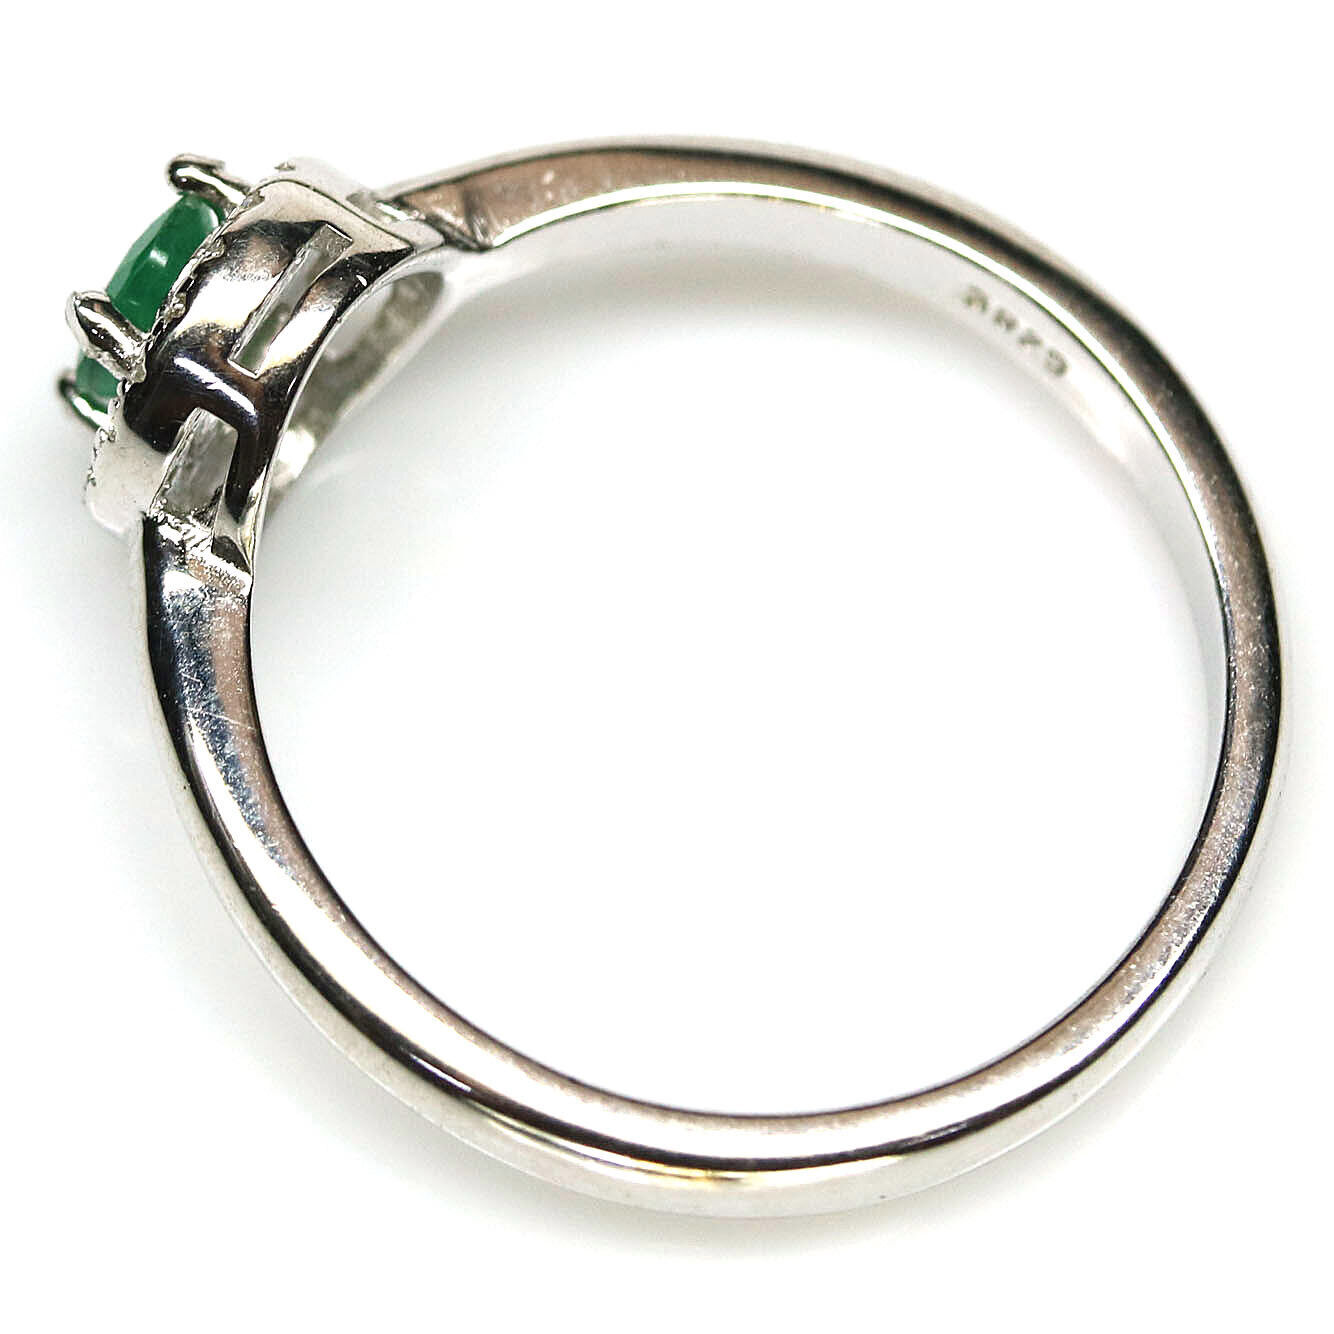 A 925 silver cluster ring set with an oval cut emerald surrounded by white stones, (N.5). - Image 2 of 2